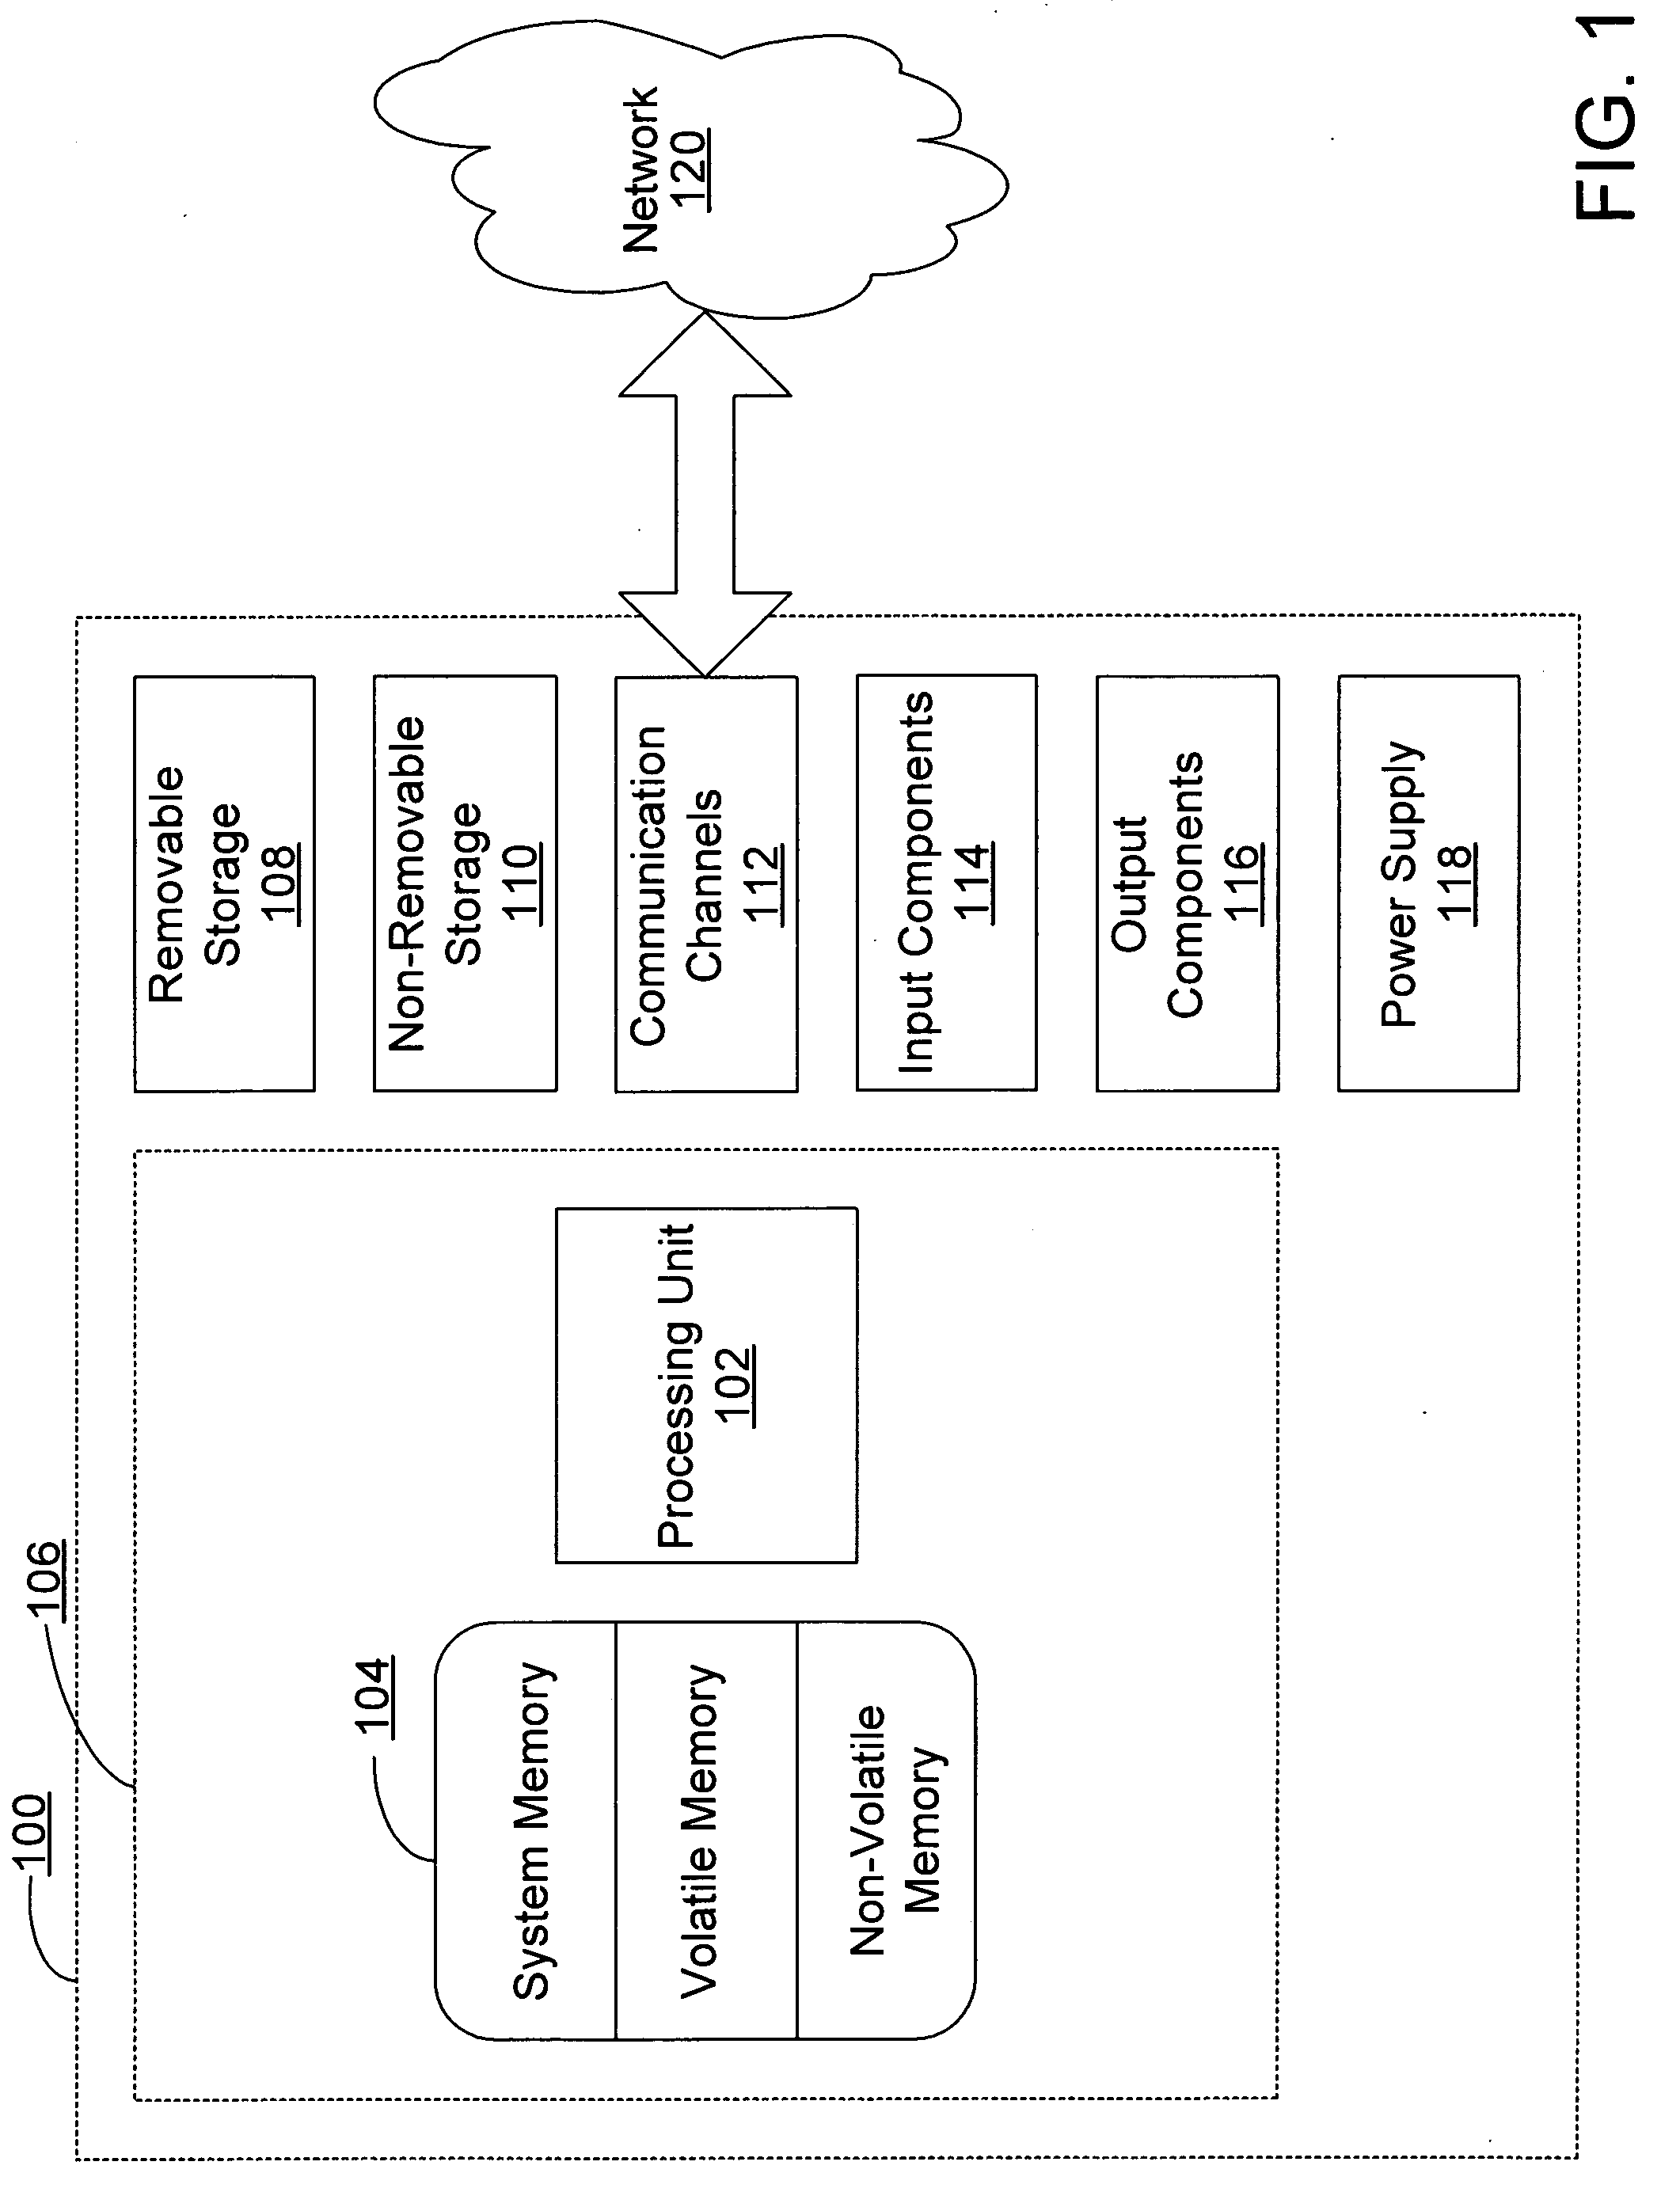 Method for determining placement of internet taps in wireless neighborhood networks